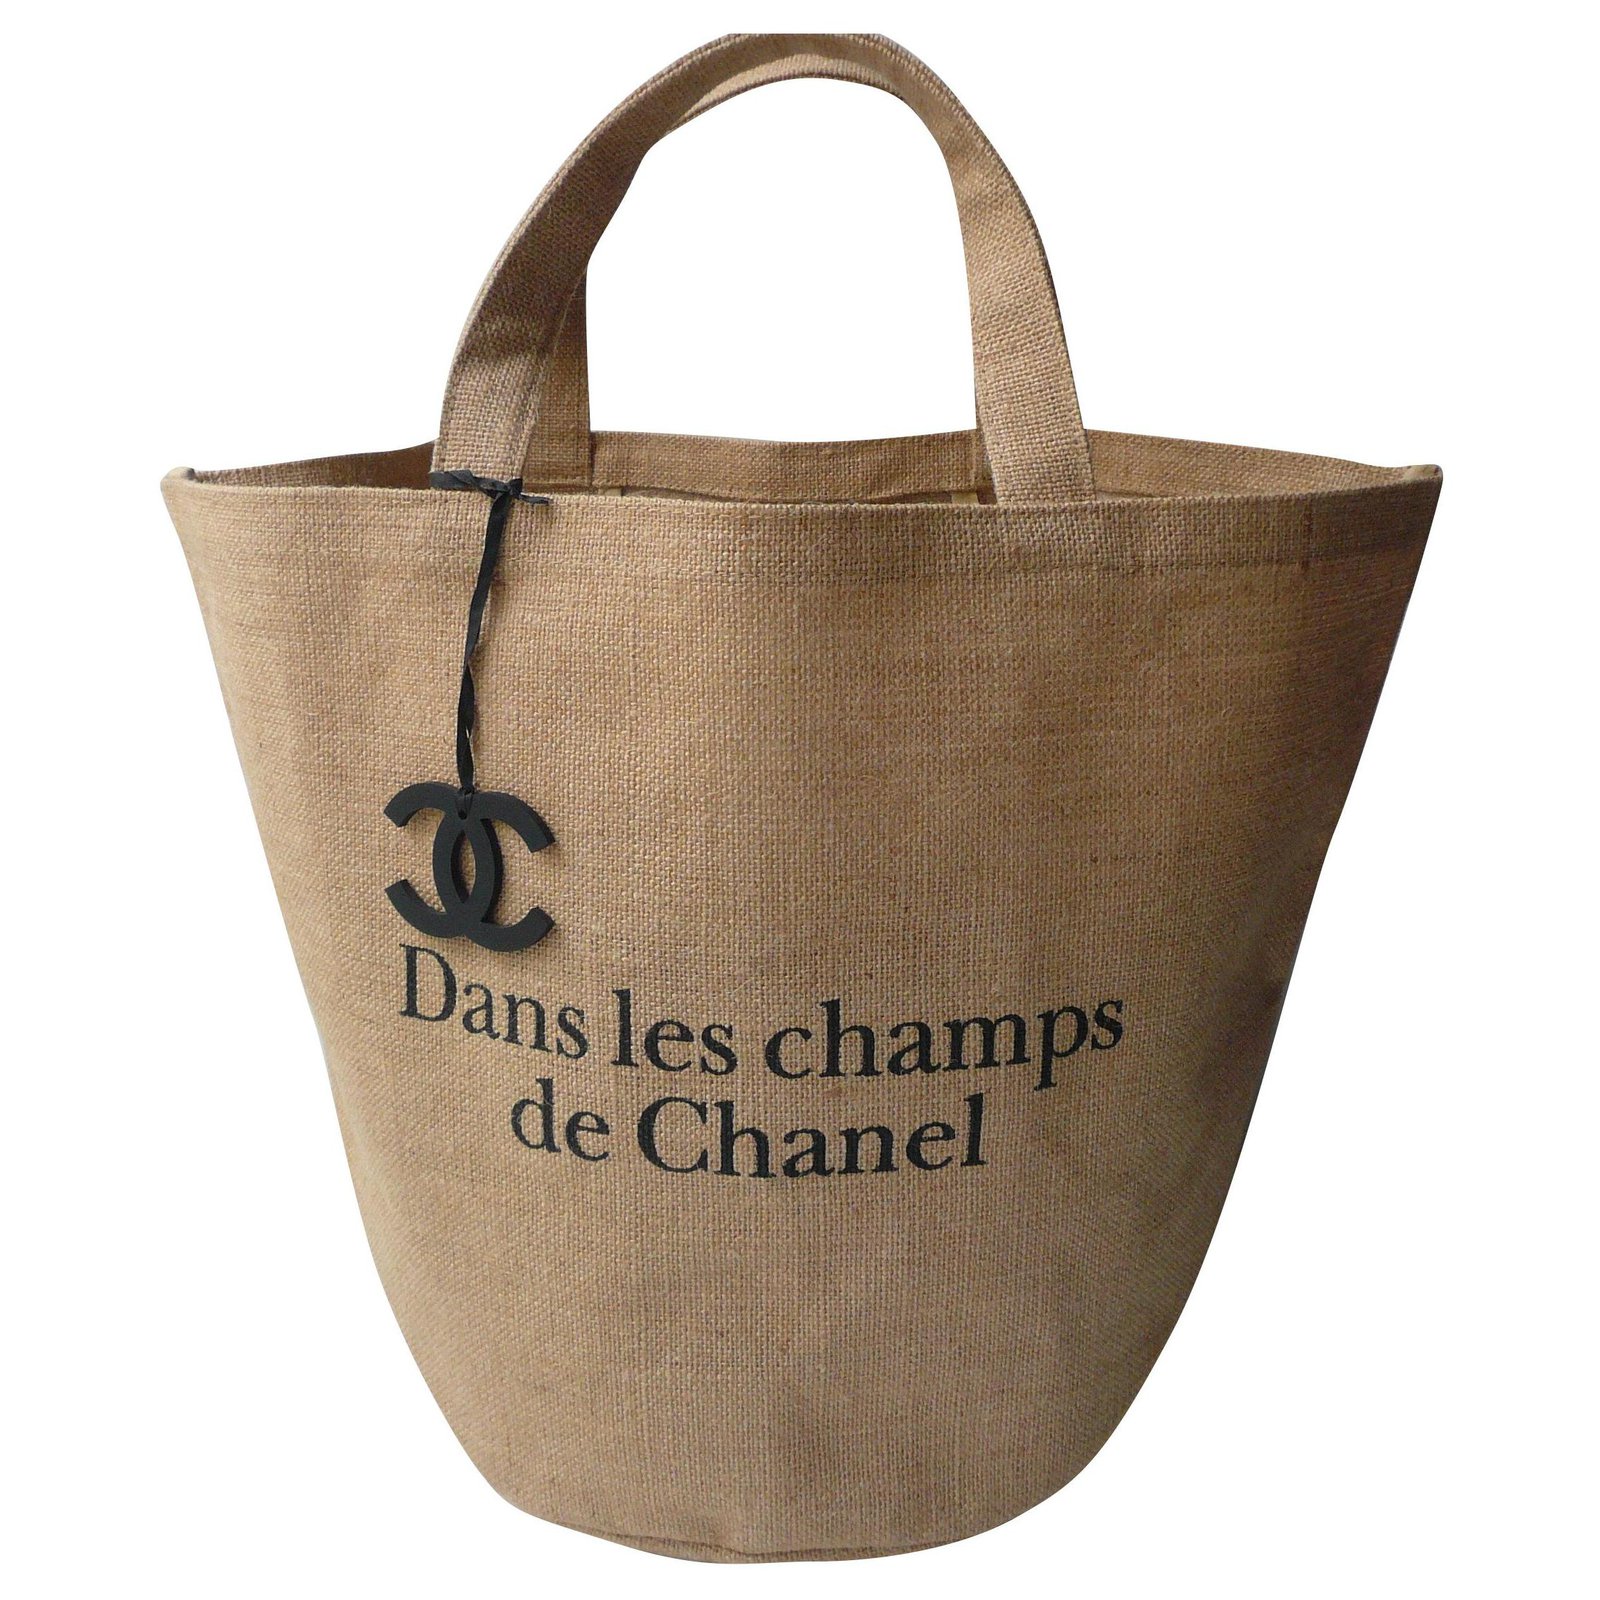 Chanel 22C Beige Deauville Large Shopping 2 Way Tote Bag  eBay